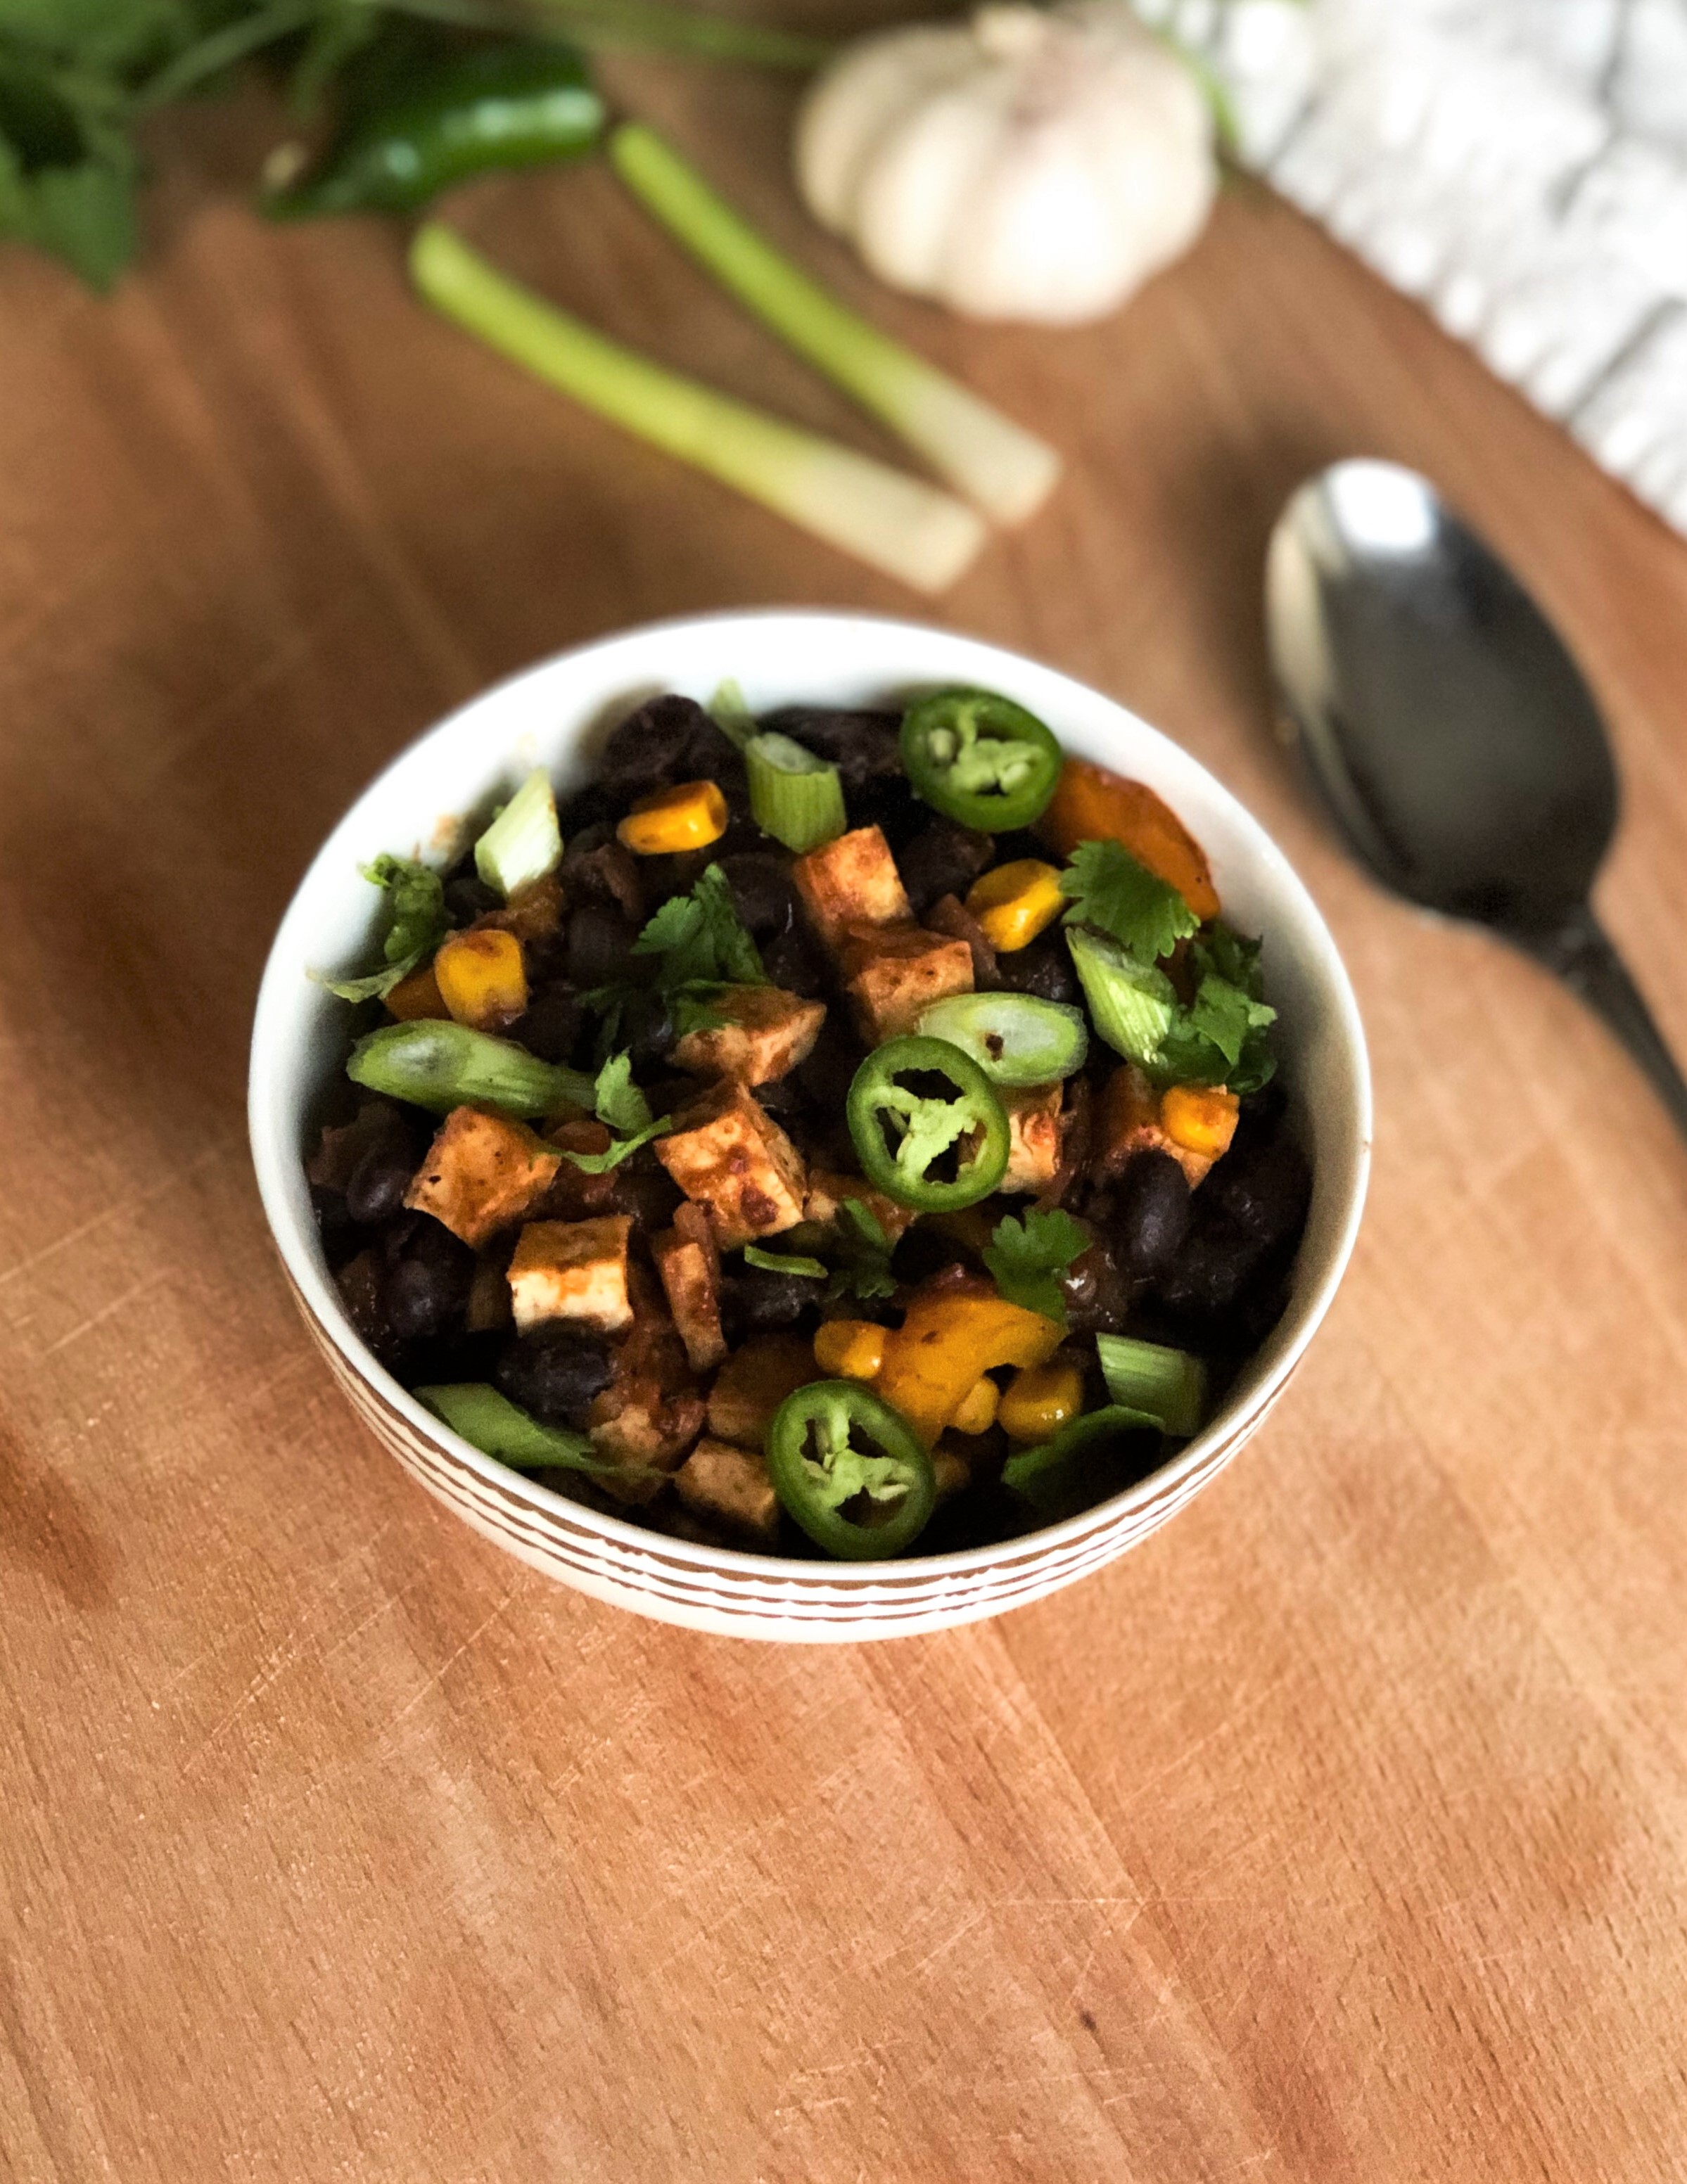 A smoky barbecue dish that is vegan? Yes please! Make this vegan tofu has with blackbeans, corn and belle peppers and you have breakfast (or dinner) sorted out.